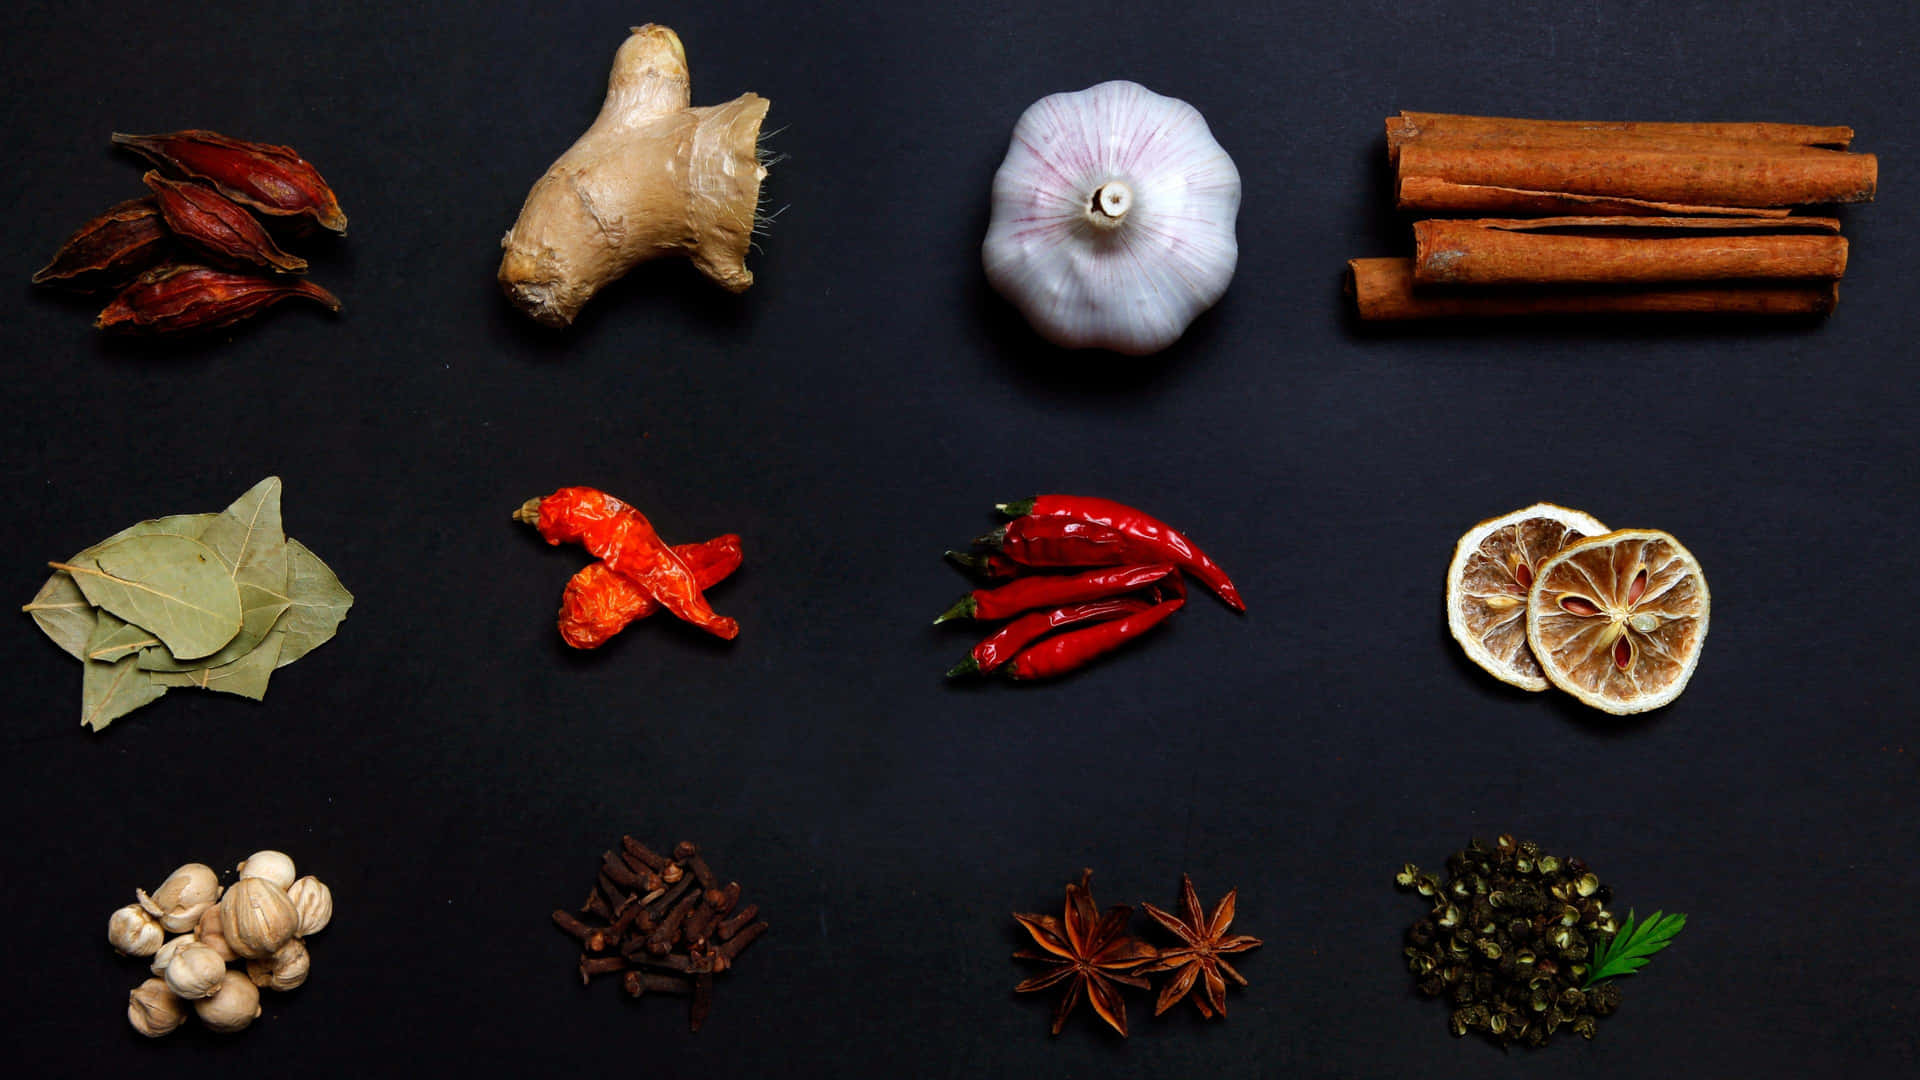 An Aromatic Adventure: Explore the Sensuous World of Spices